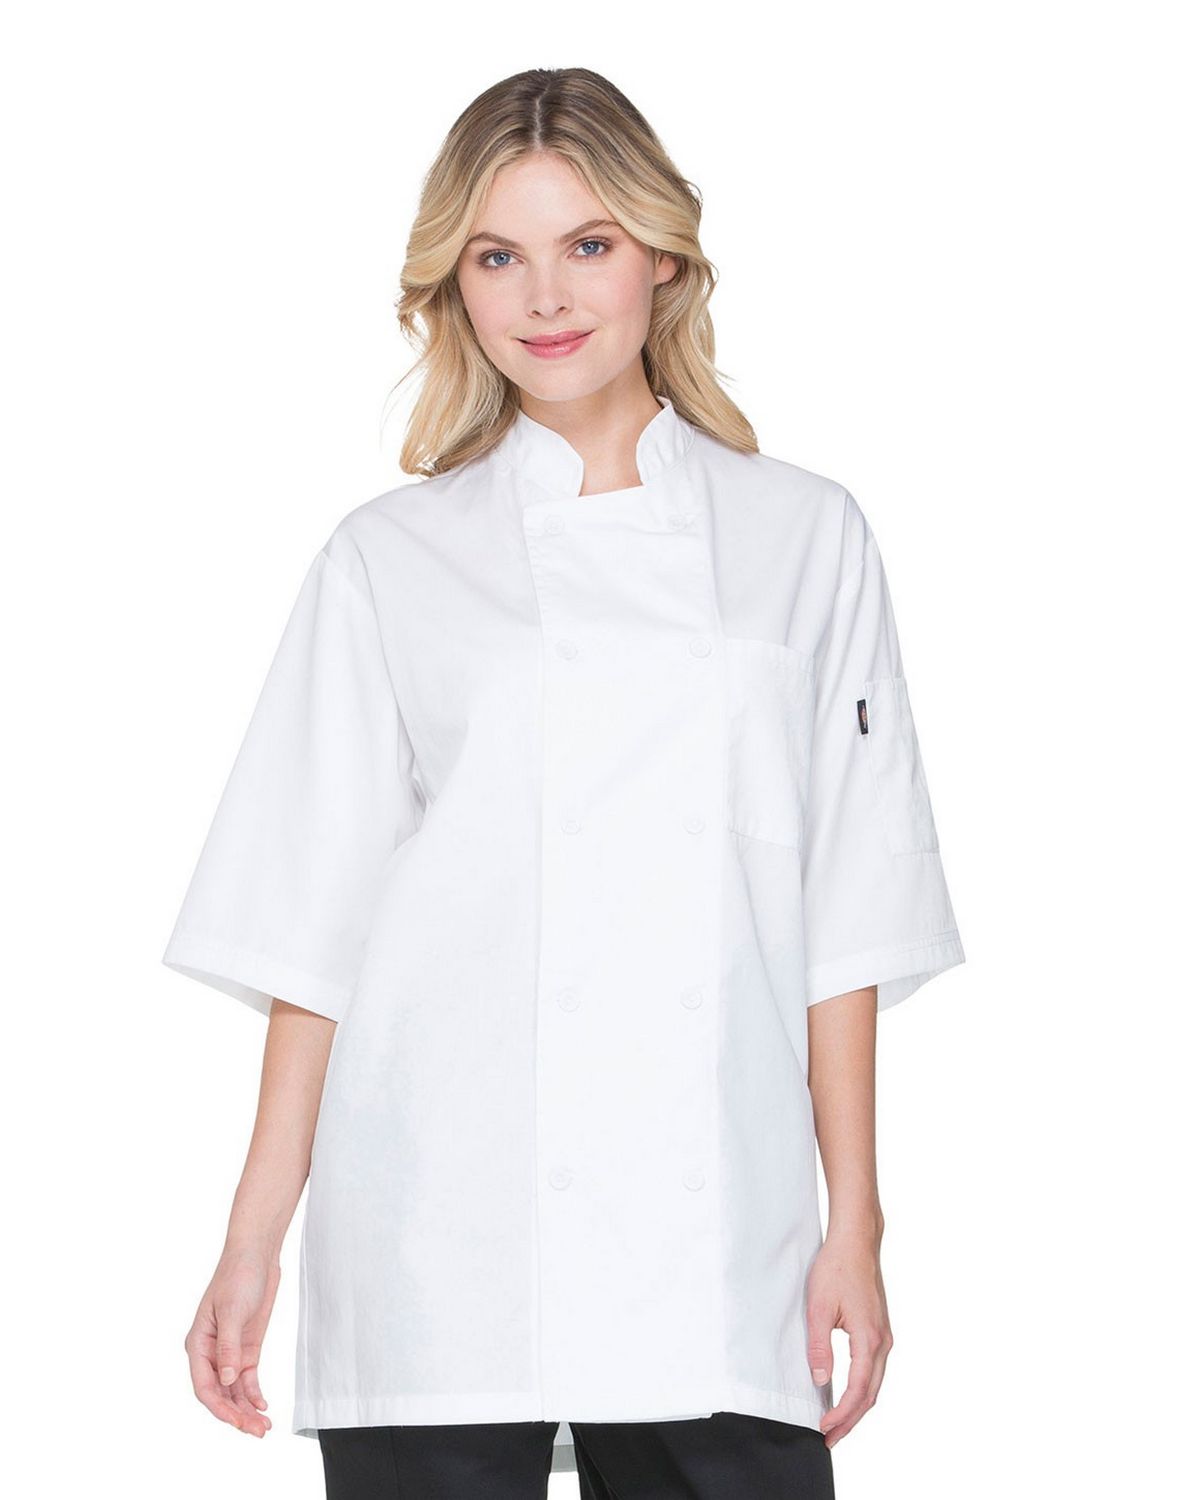 White Dickies Unisex Cool Breeze Chef Coat with Black Piping DC411 WTBK 